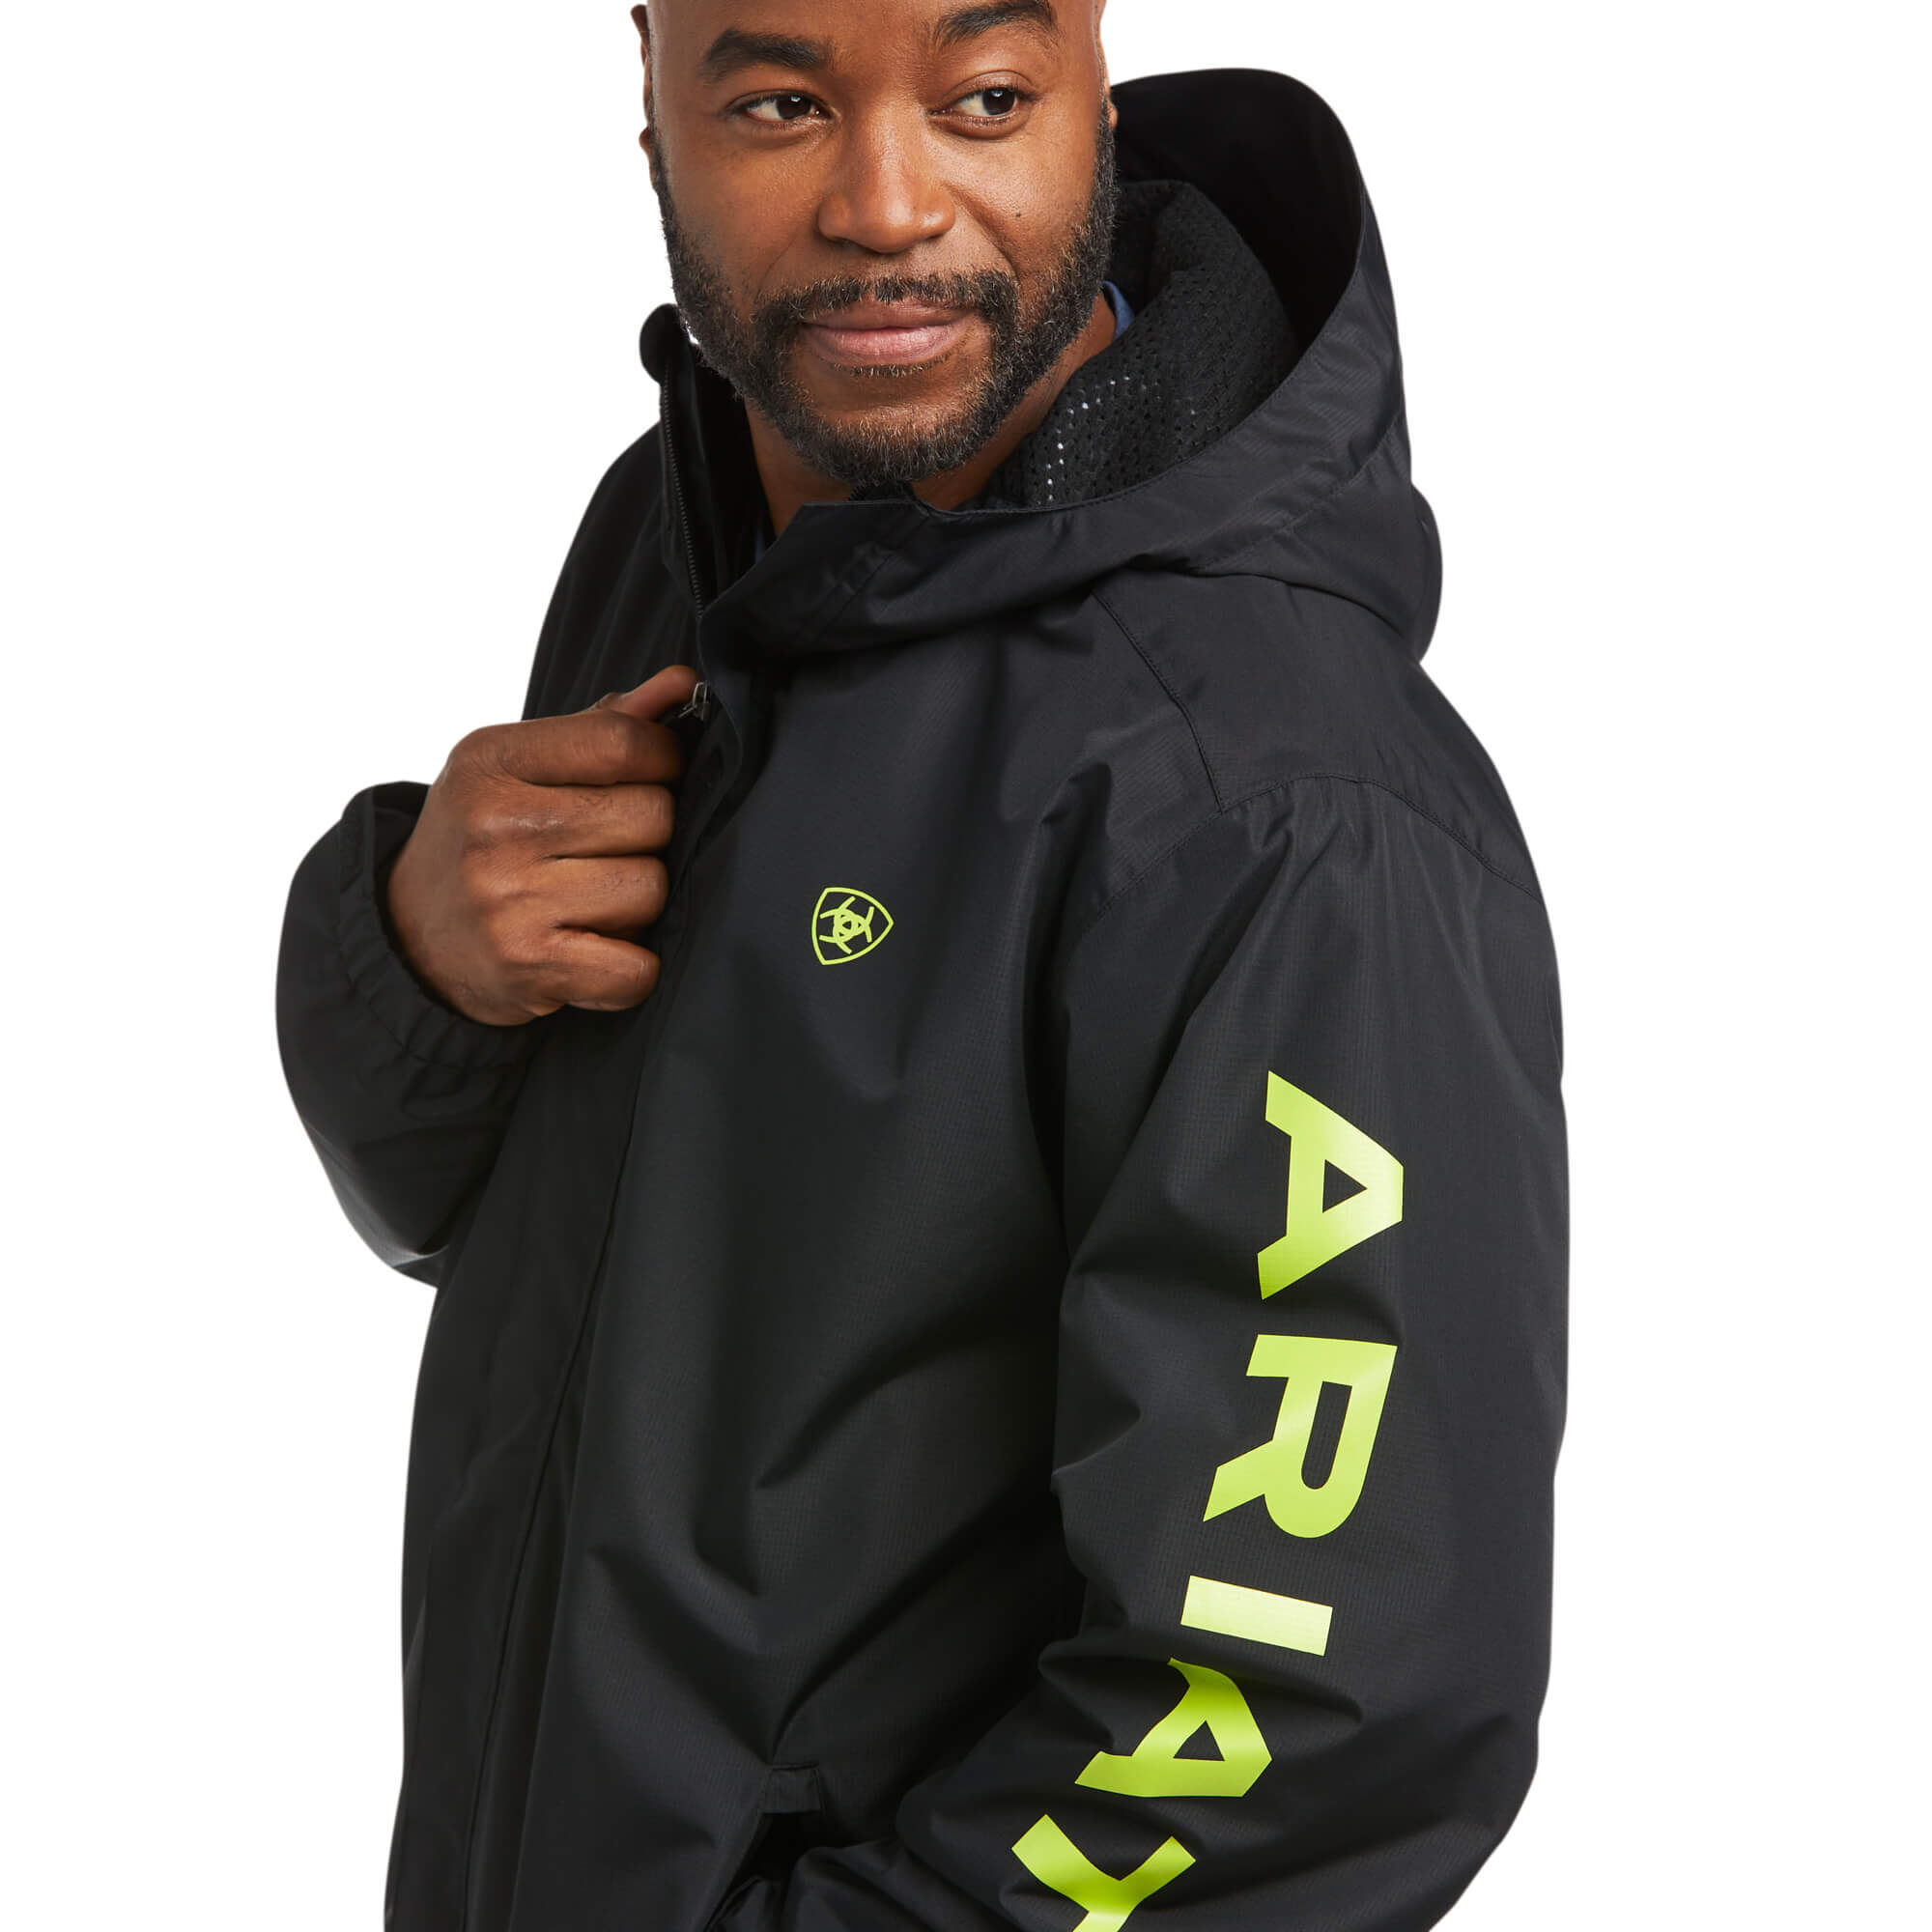 Men's Rebar Stormshell Logo Waterproof Jacket in Black/Lime, Size:  Large_Tall by Ariat